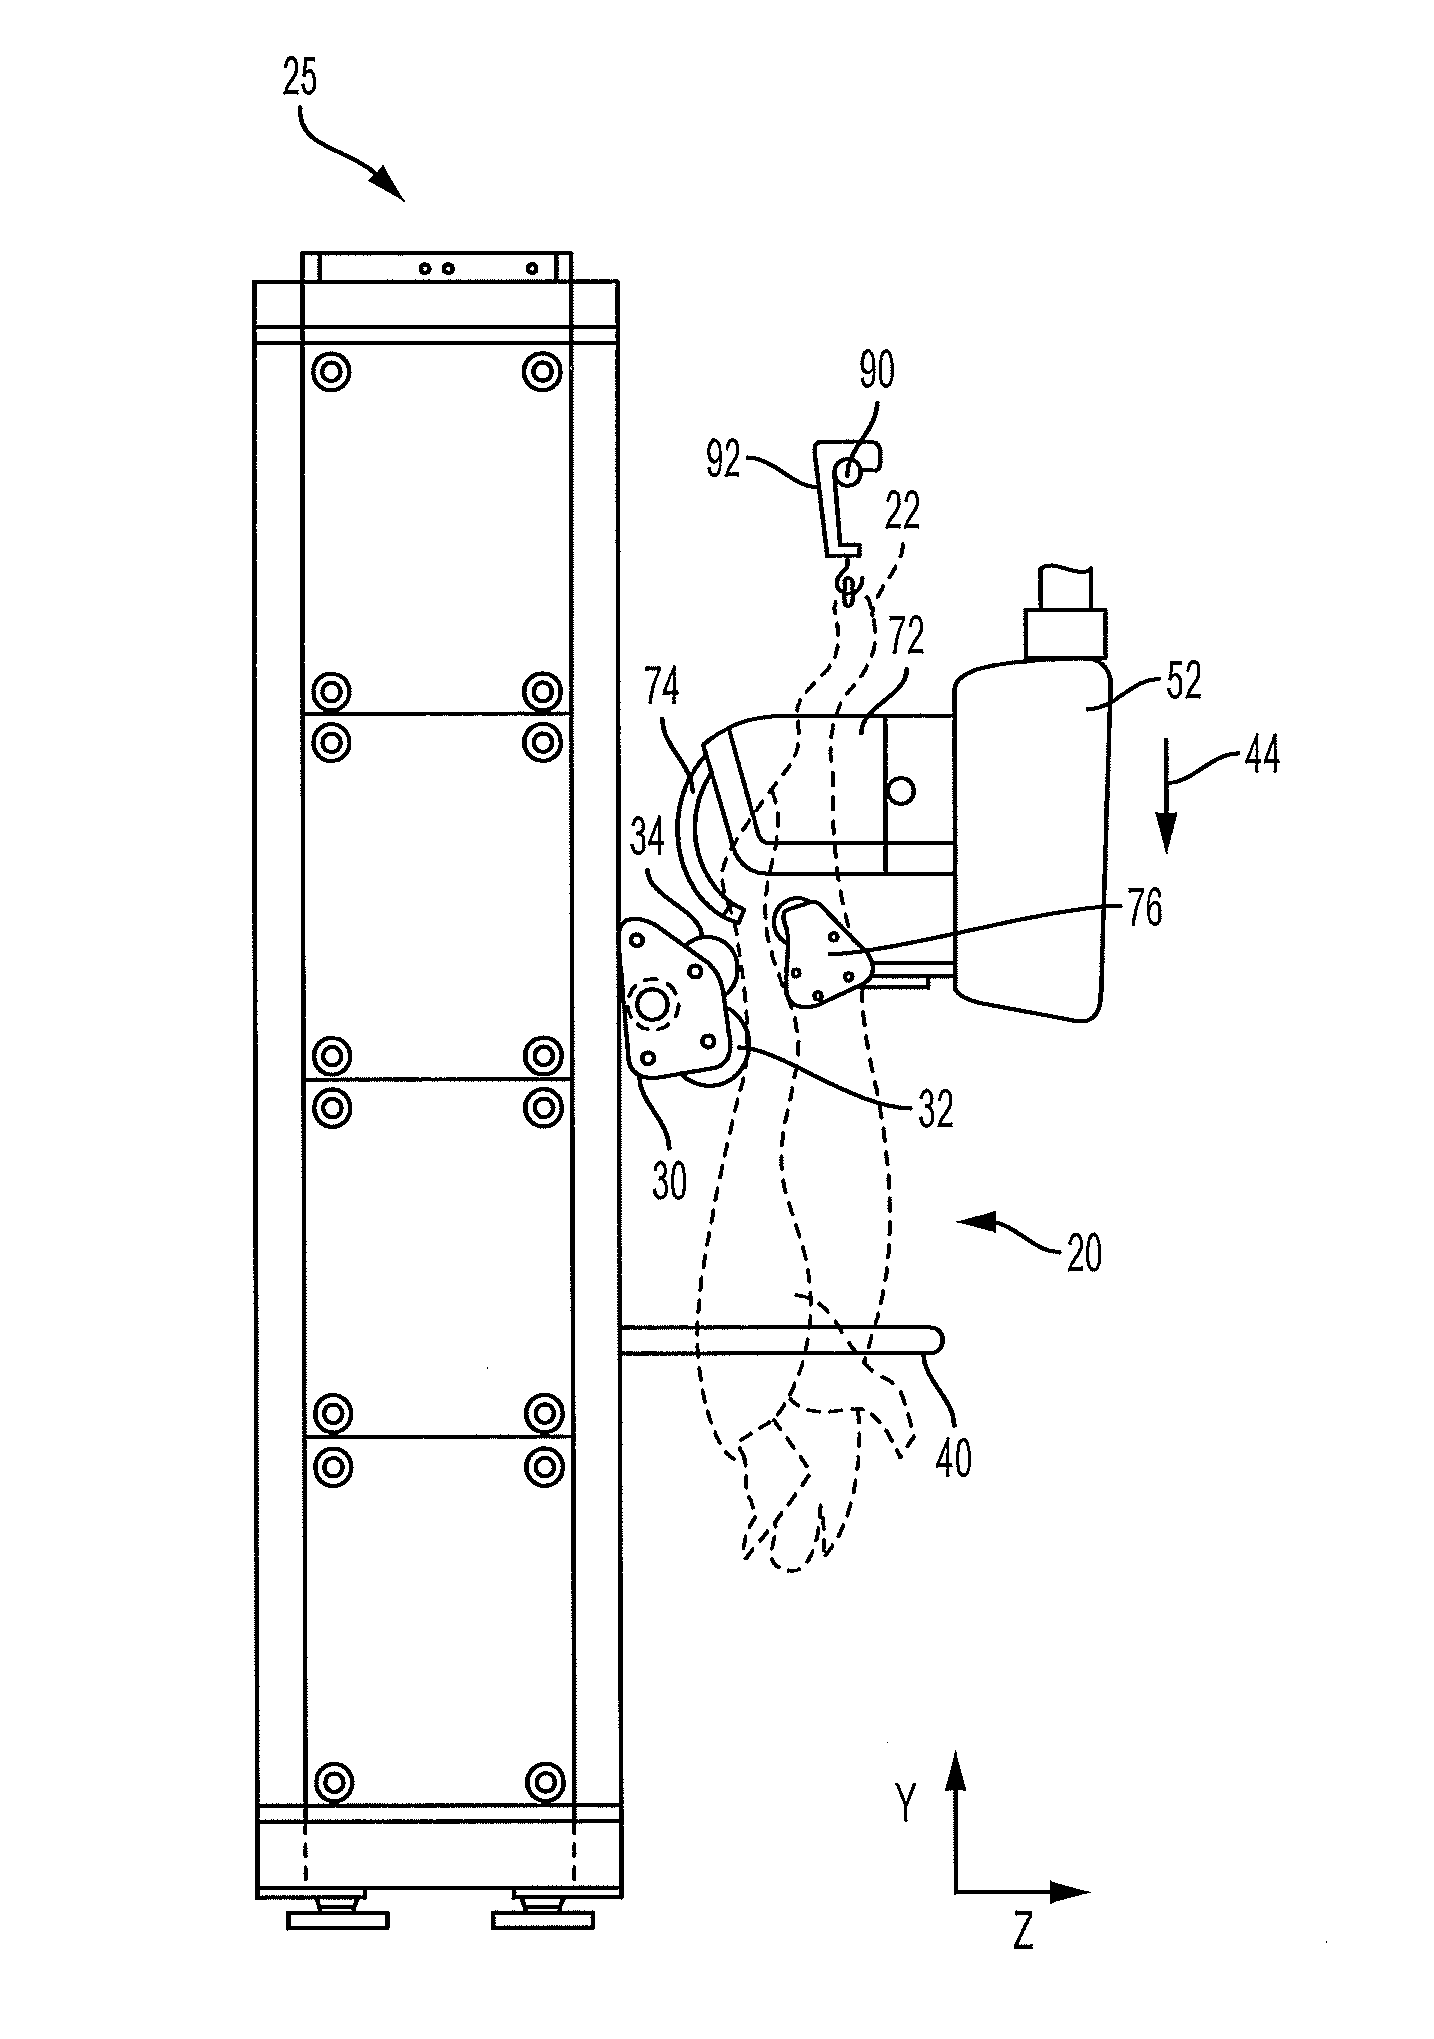 Robotic carcass processing method and system